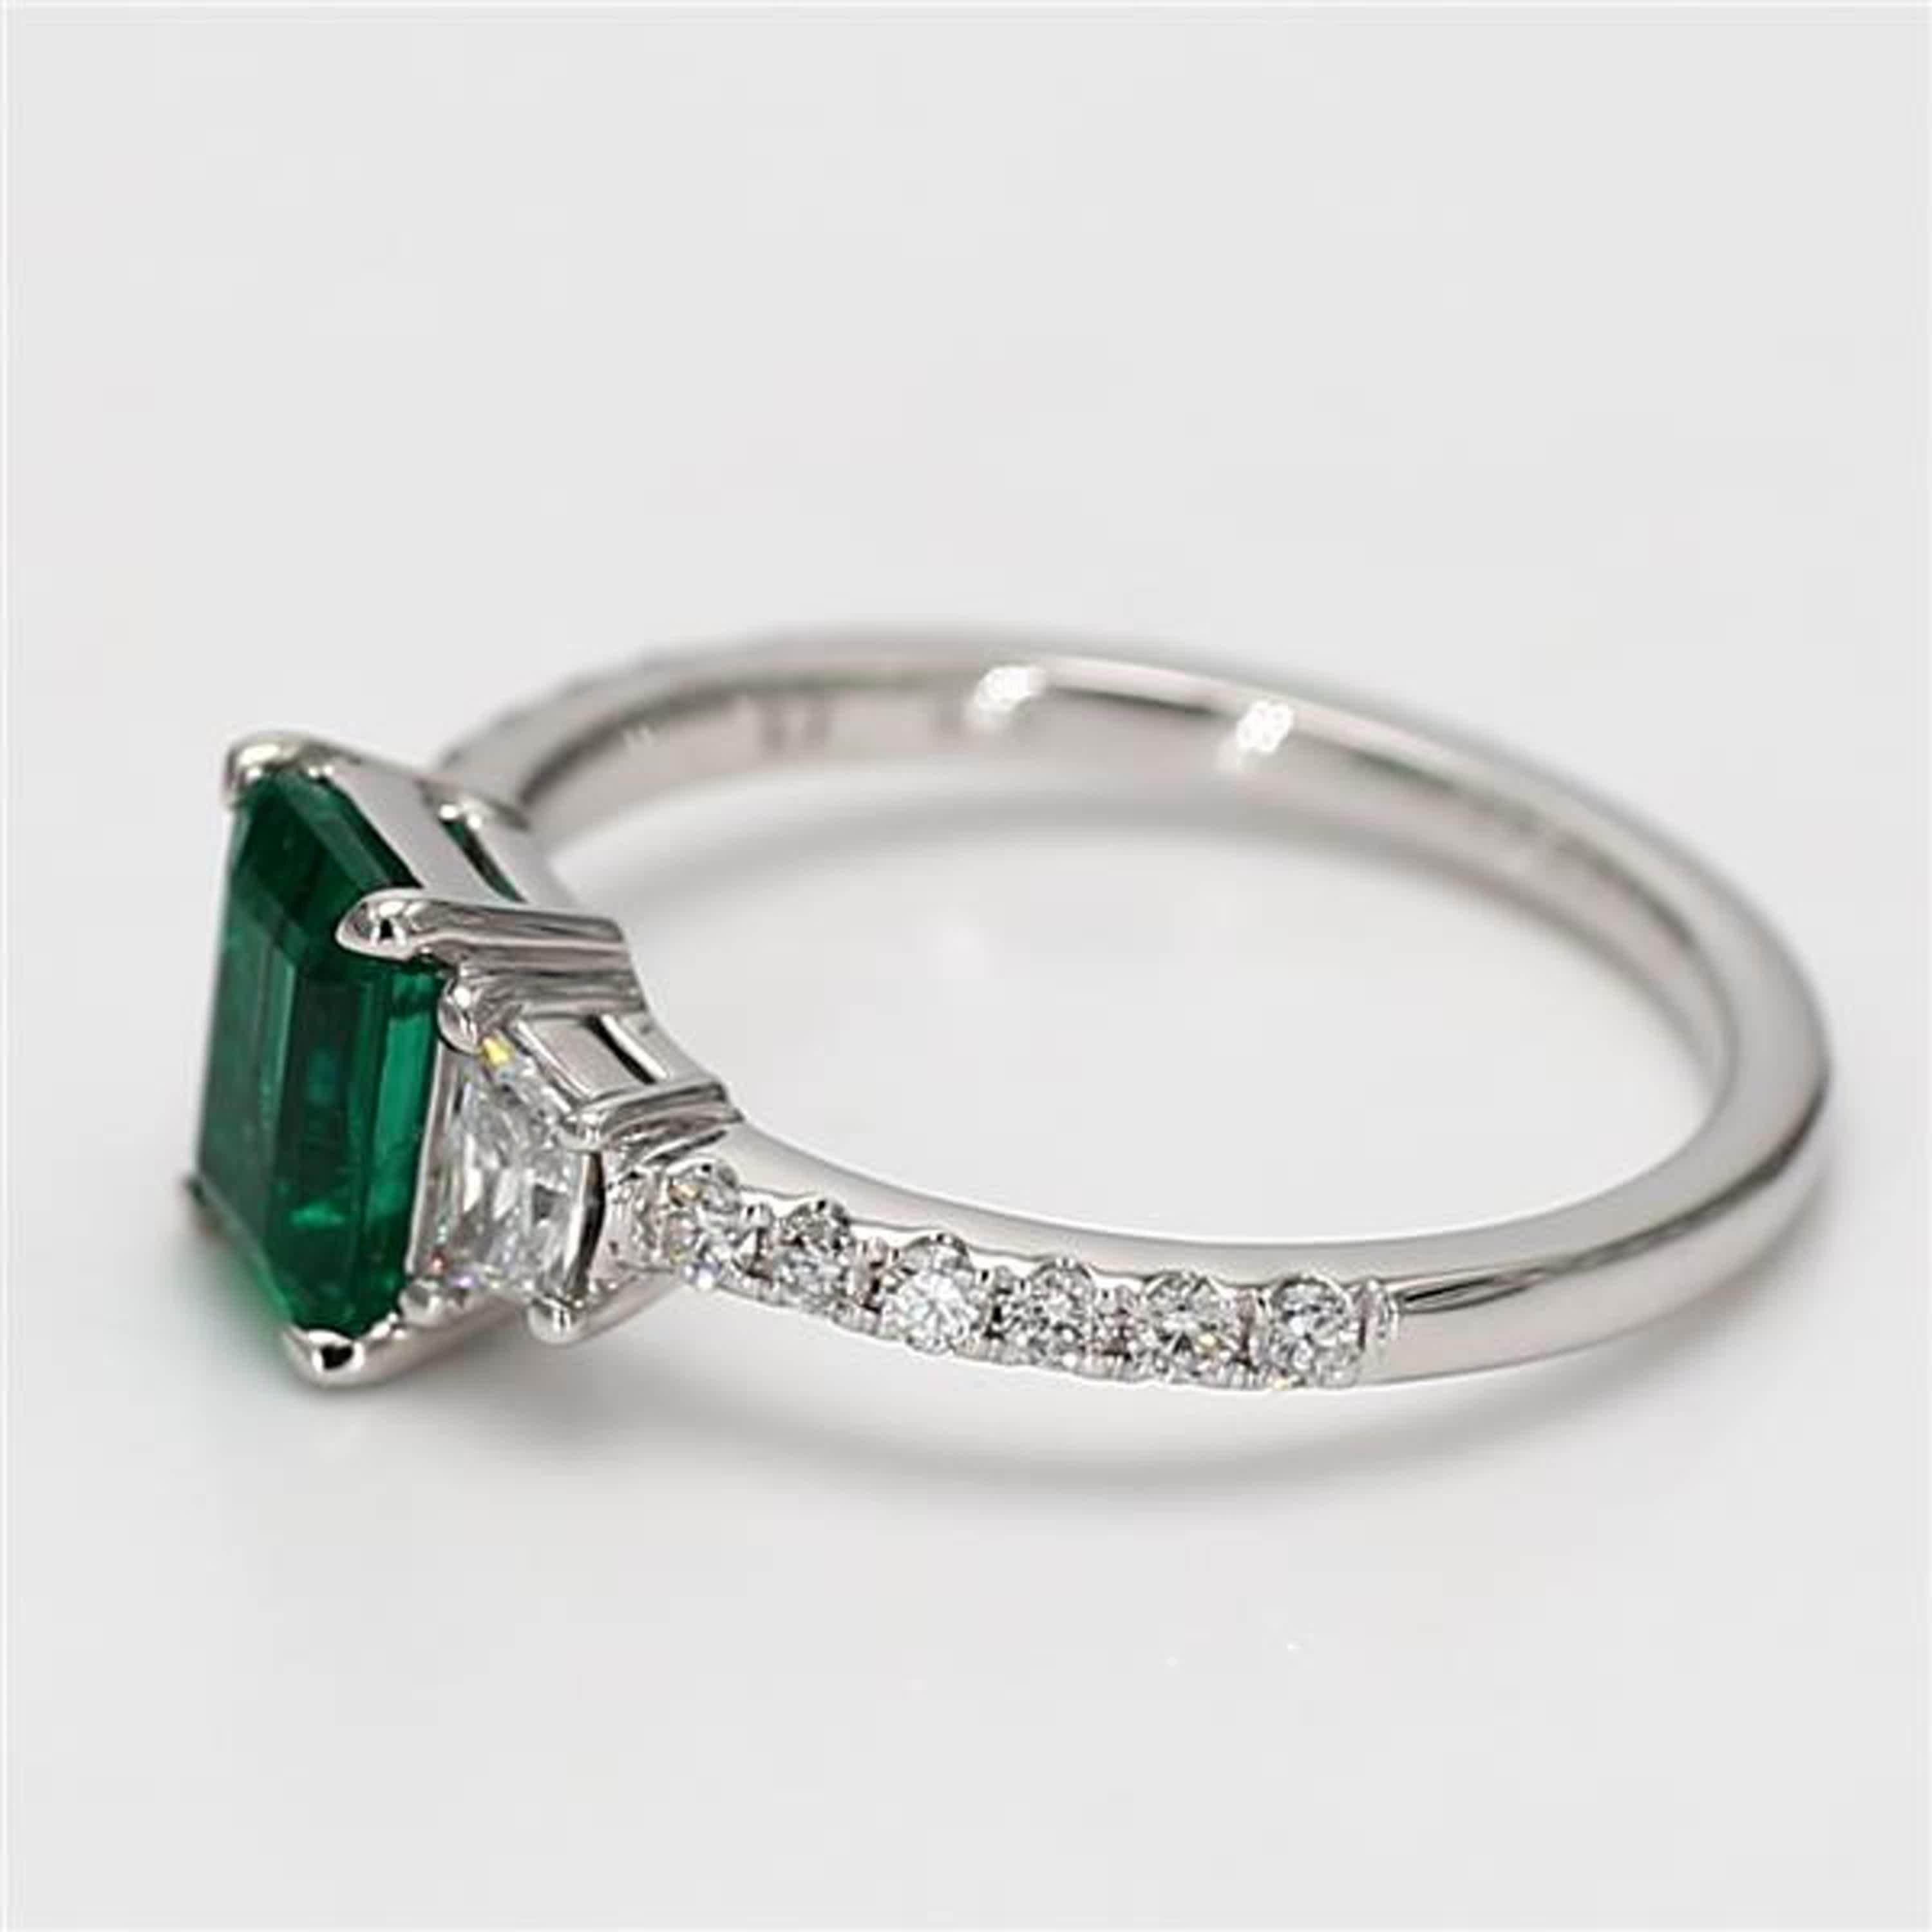 Contemporary Natural Emerald Cut Emerald and White Diamond 1.45 Carat TW Gold Cocktail Ring